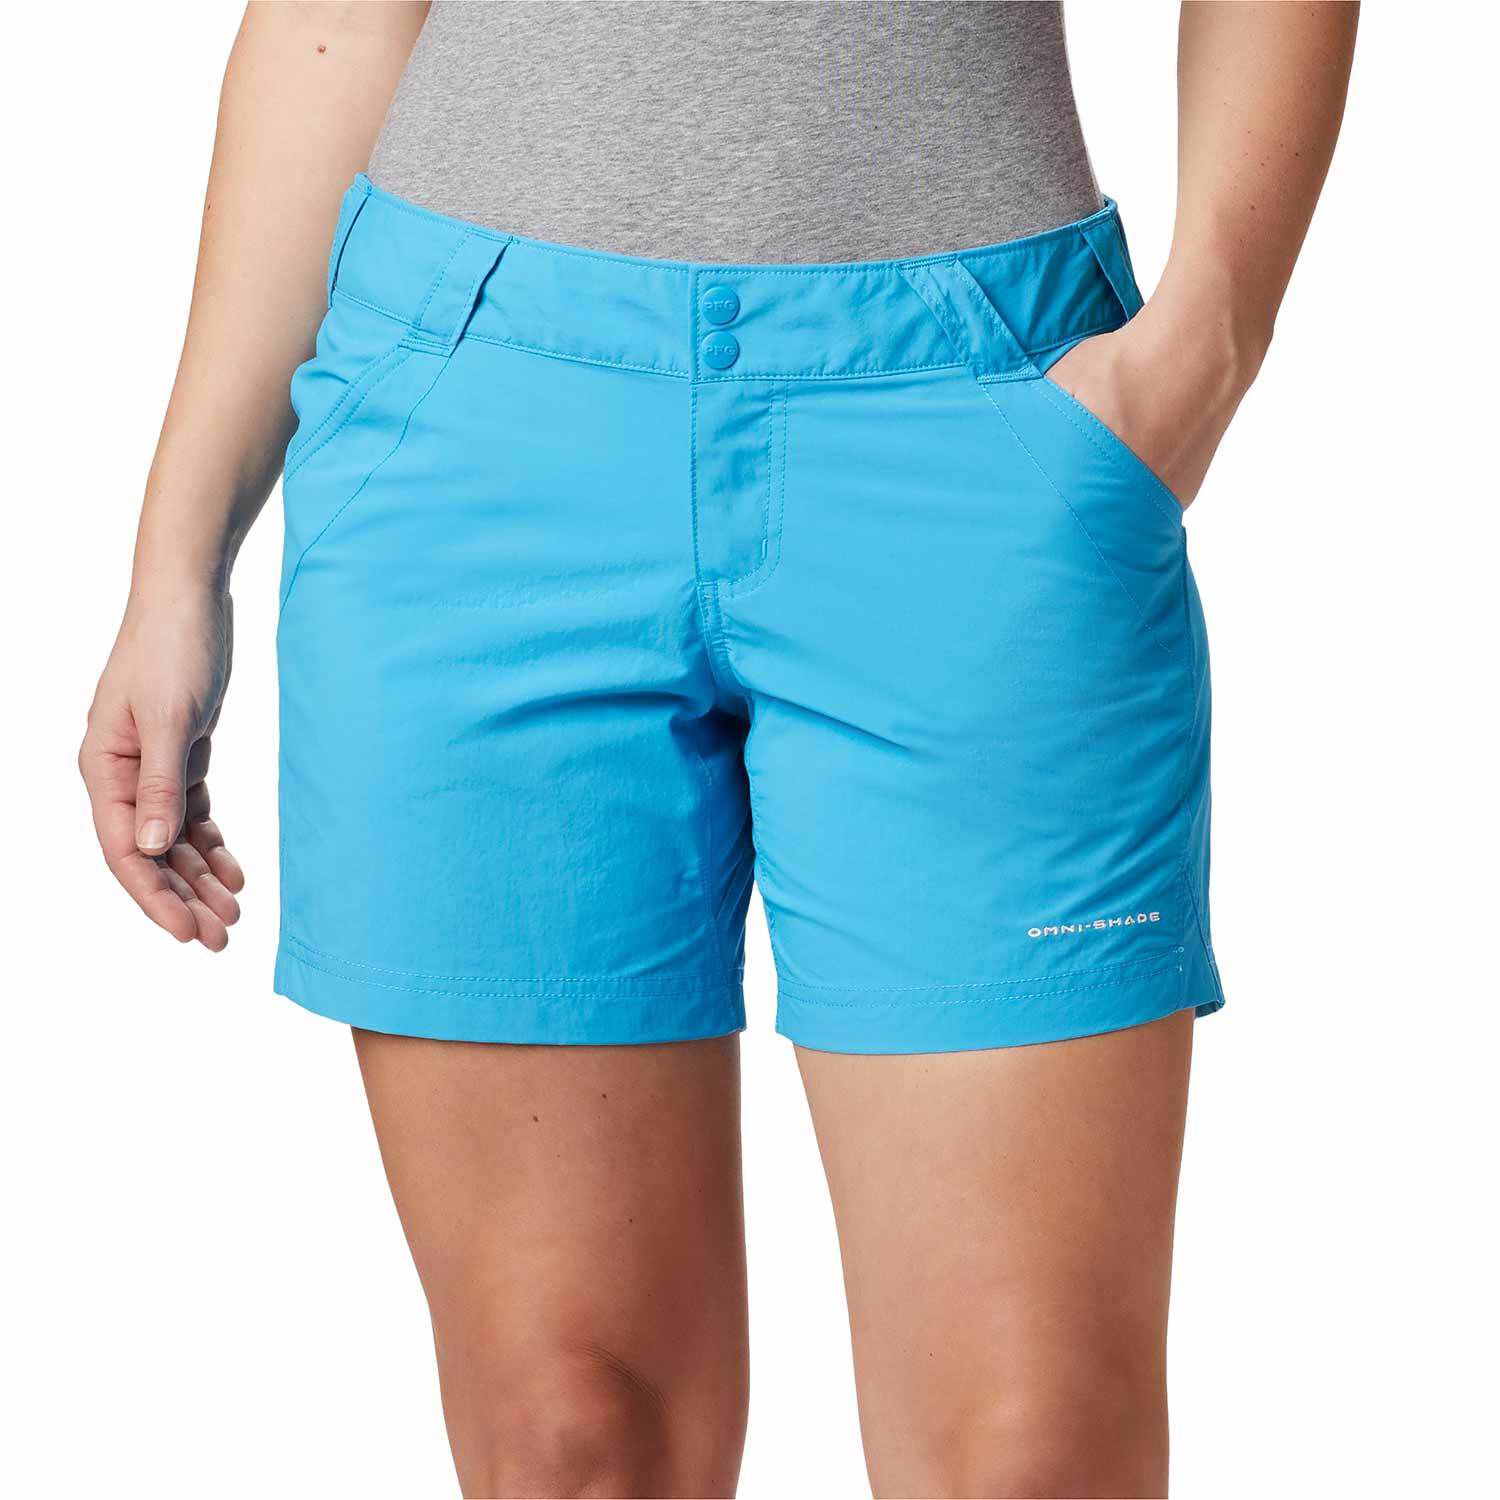 Inseam 6" Columbia Women's Coral Point II Shorts Mint Green Size M Or L 